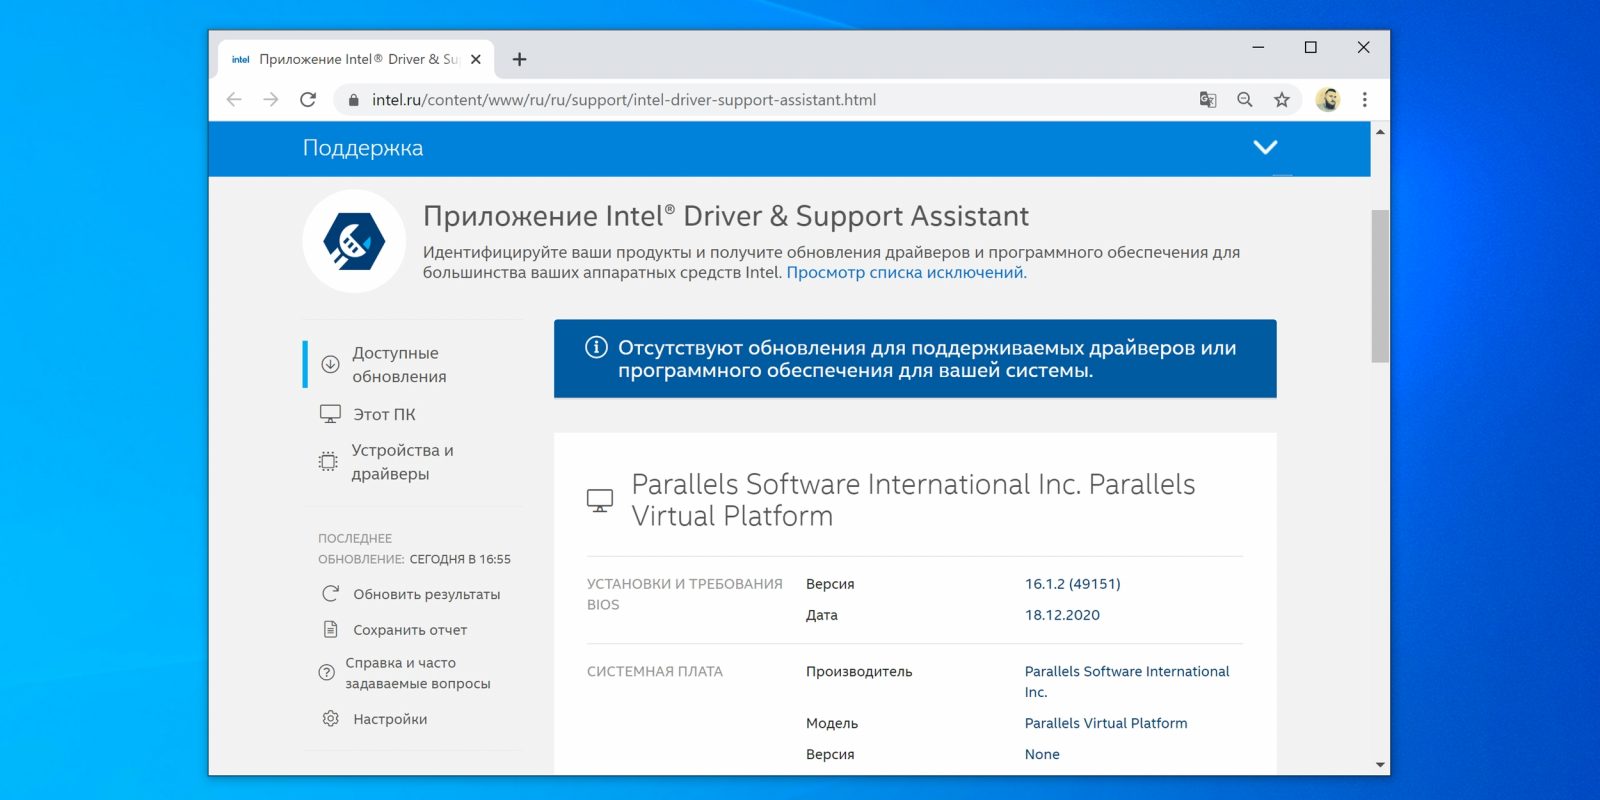 Intel Driver & Support Assistant 23.4.39.9 instal the new